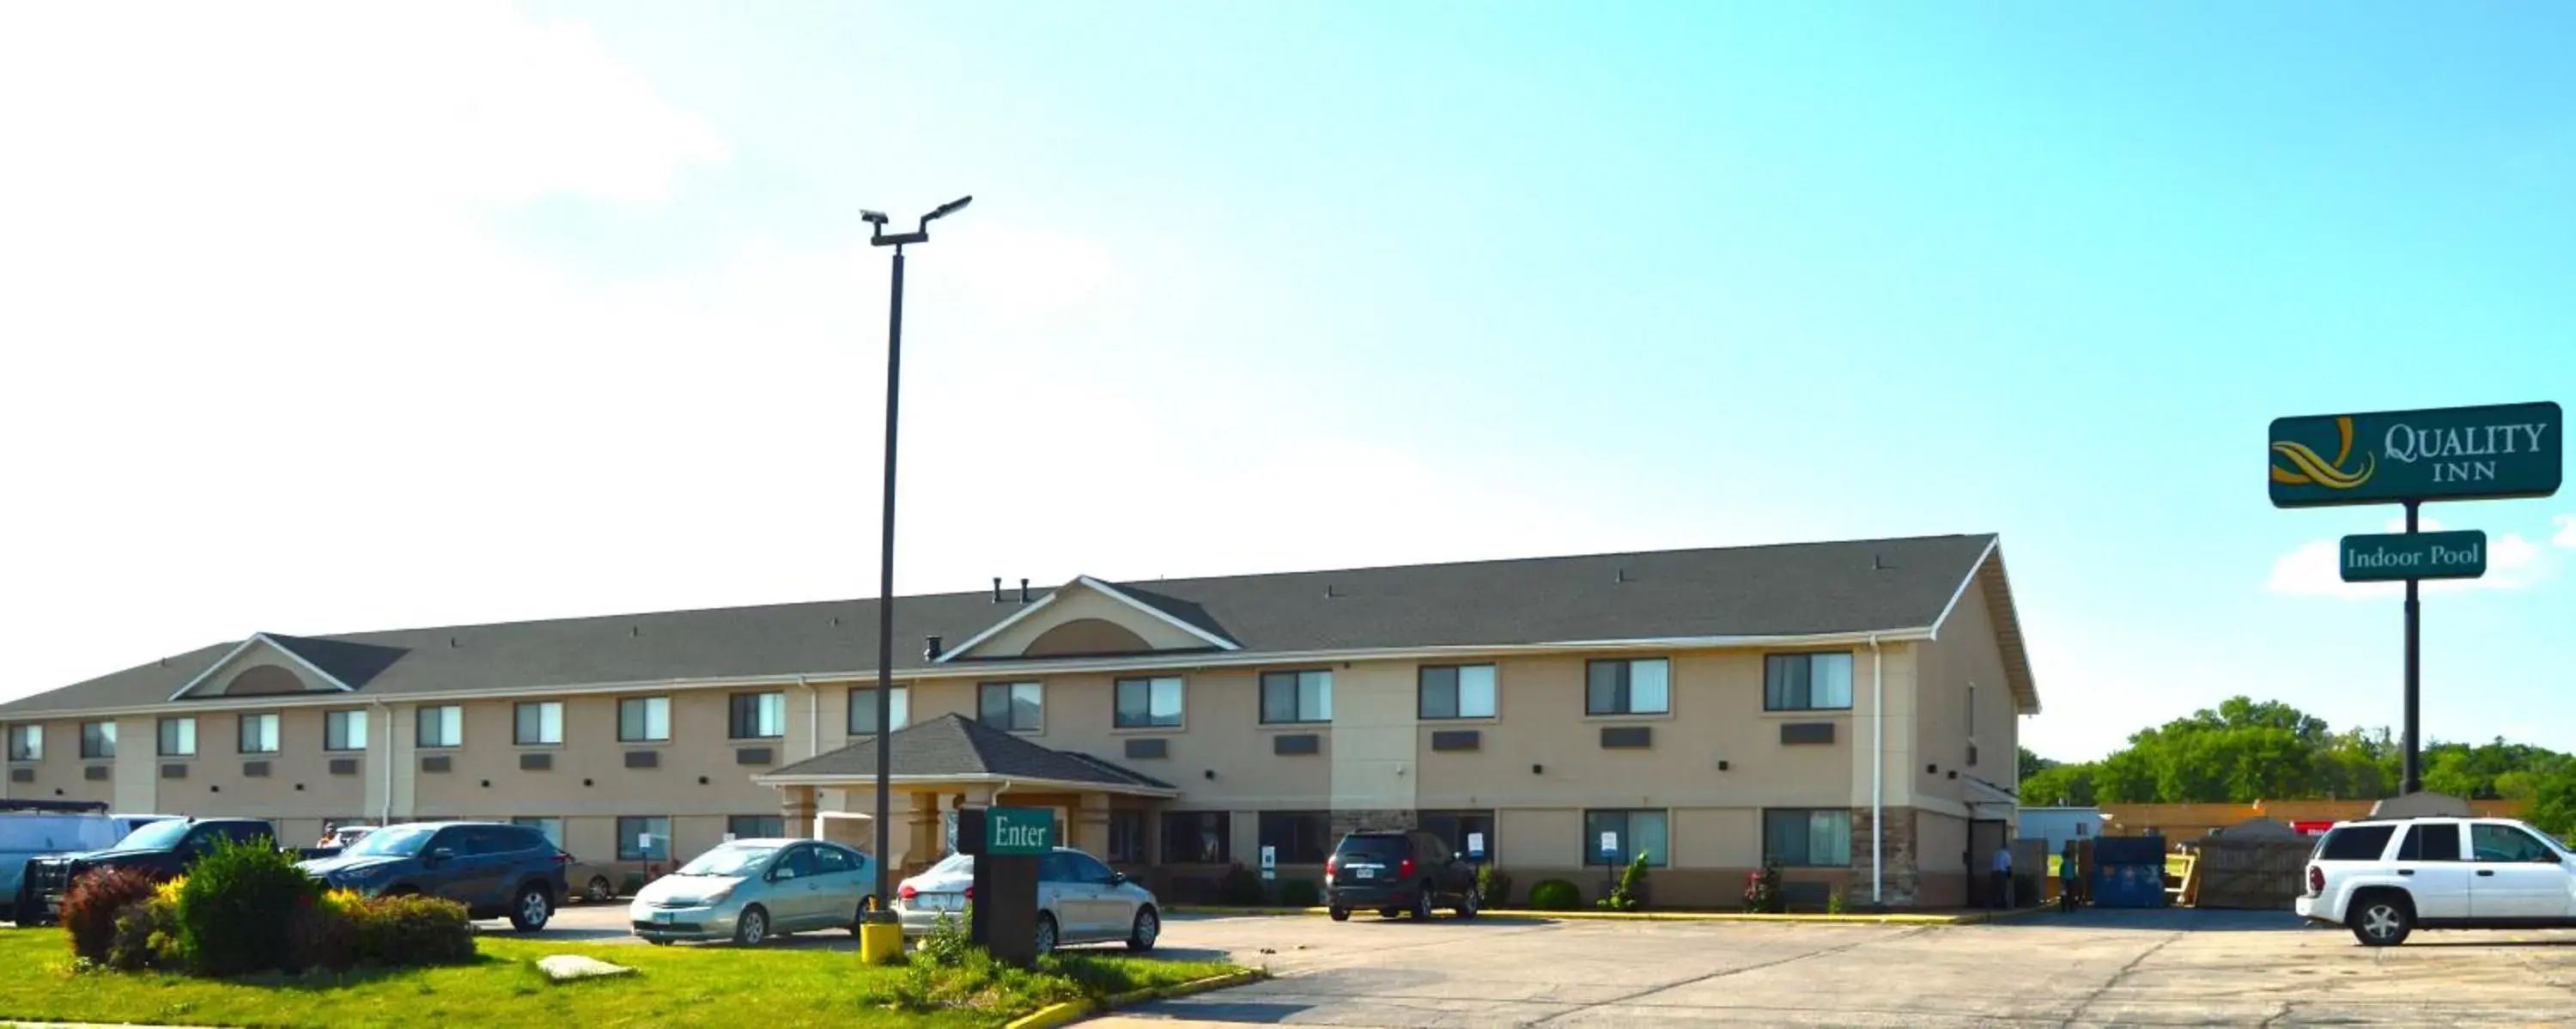 Property Building in Quality Inn - Coralville